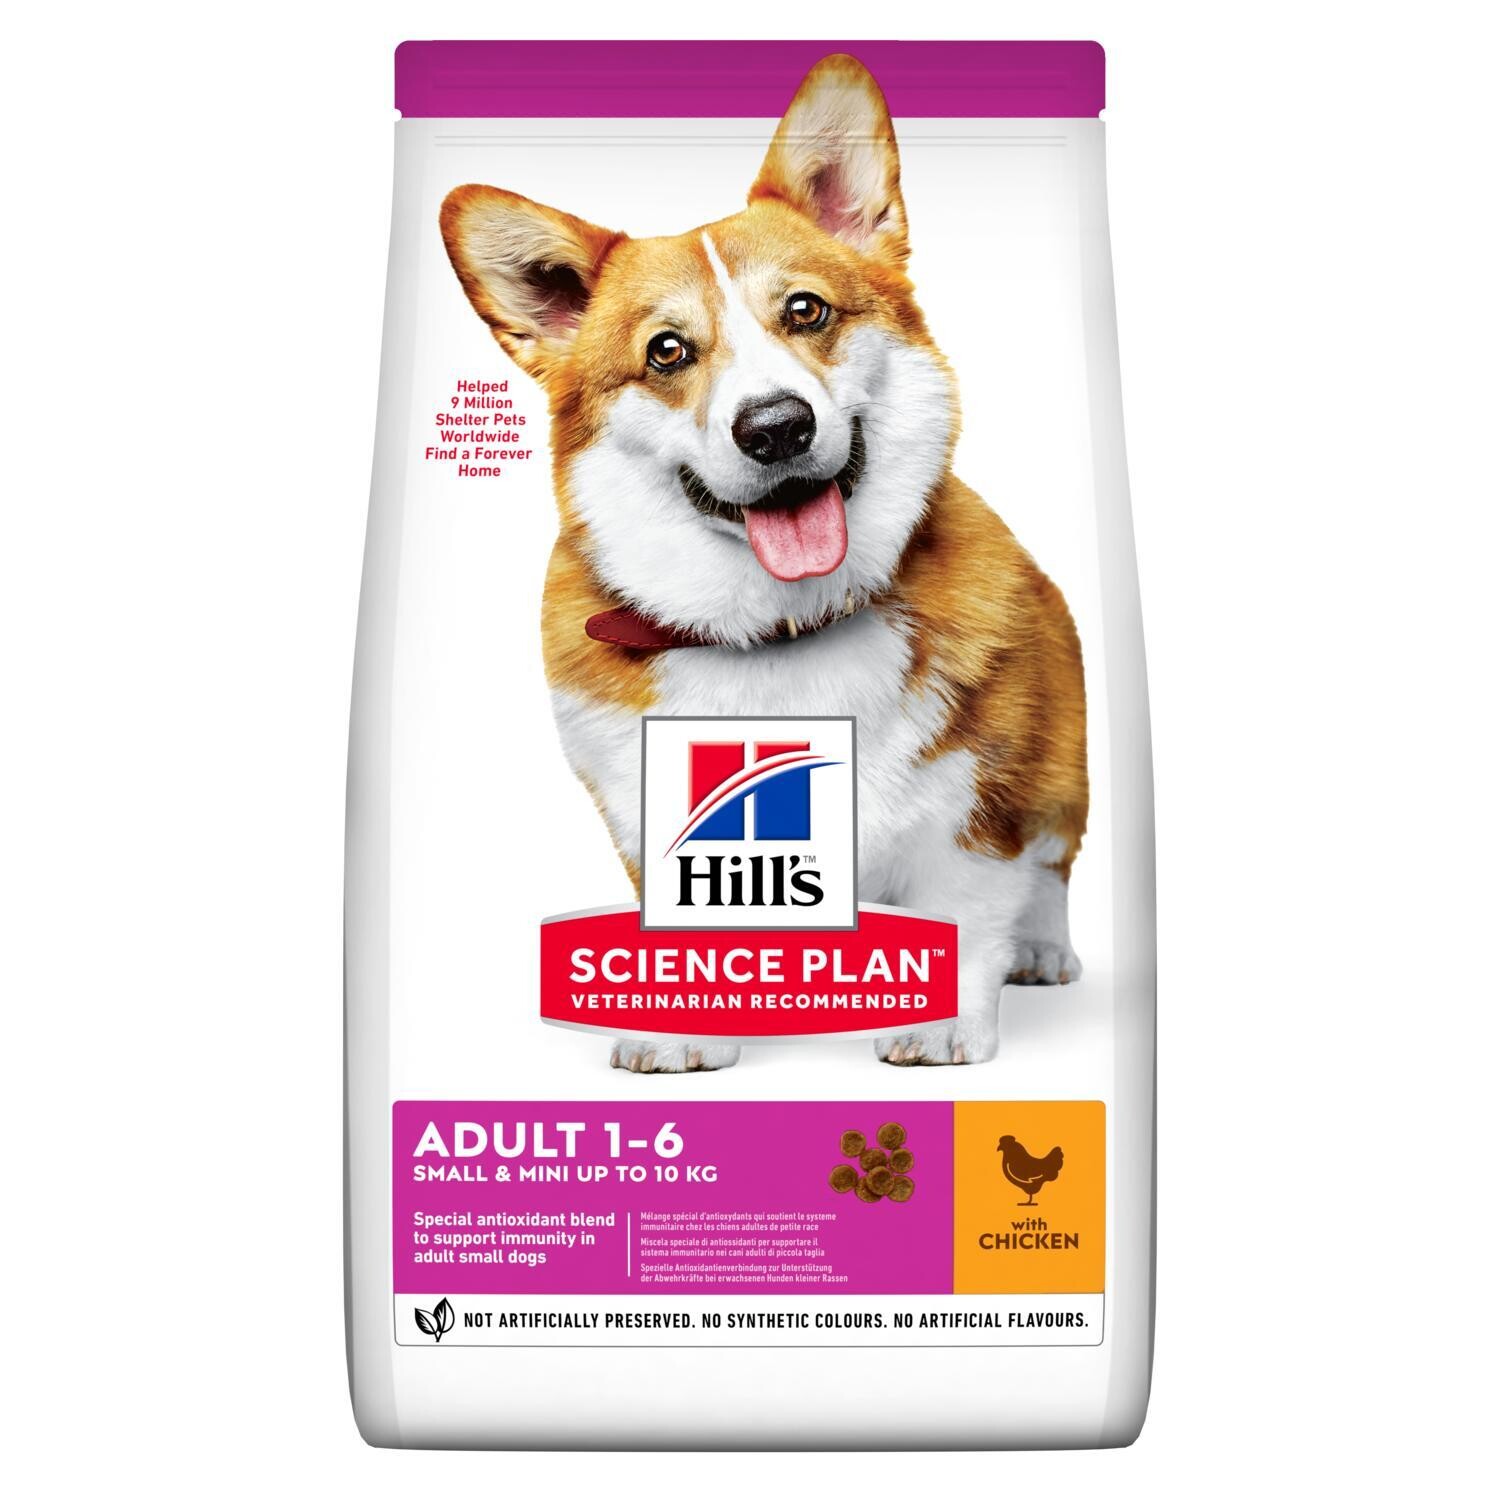 Hills Science Plan Adult Small & Mini Dry Dog Food Chicken Flavour 3KG